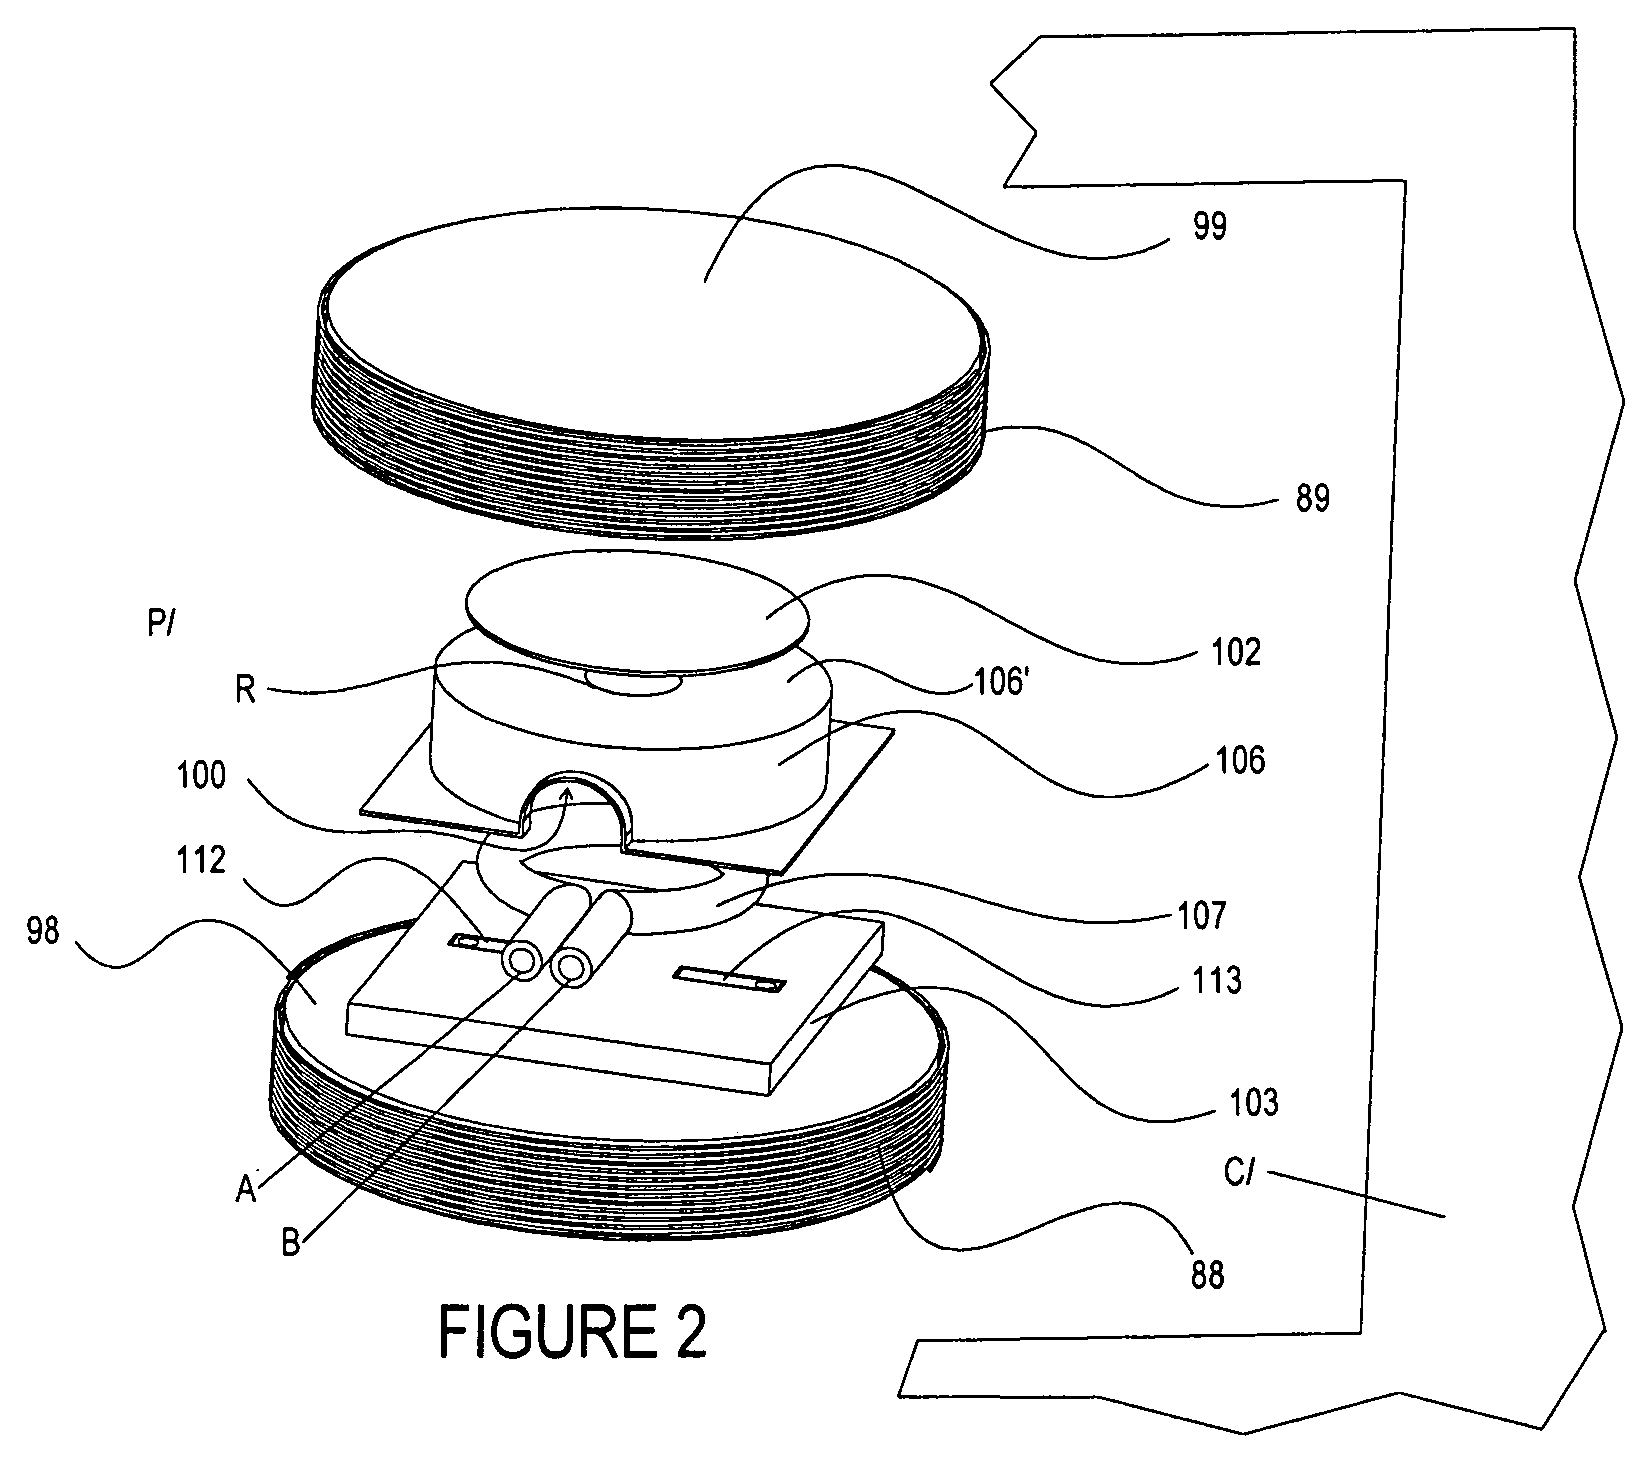 Method of and apparatus for in-situ measurement of degradation of automotive fluids and the like by Micro-Electron Spin Resonance (ESR) spectrometry